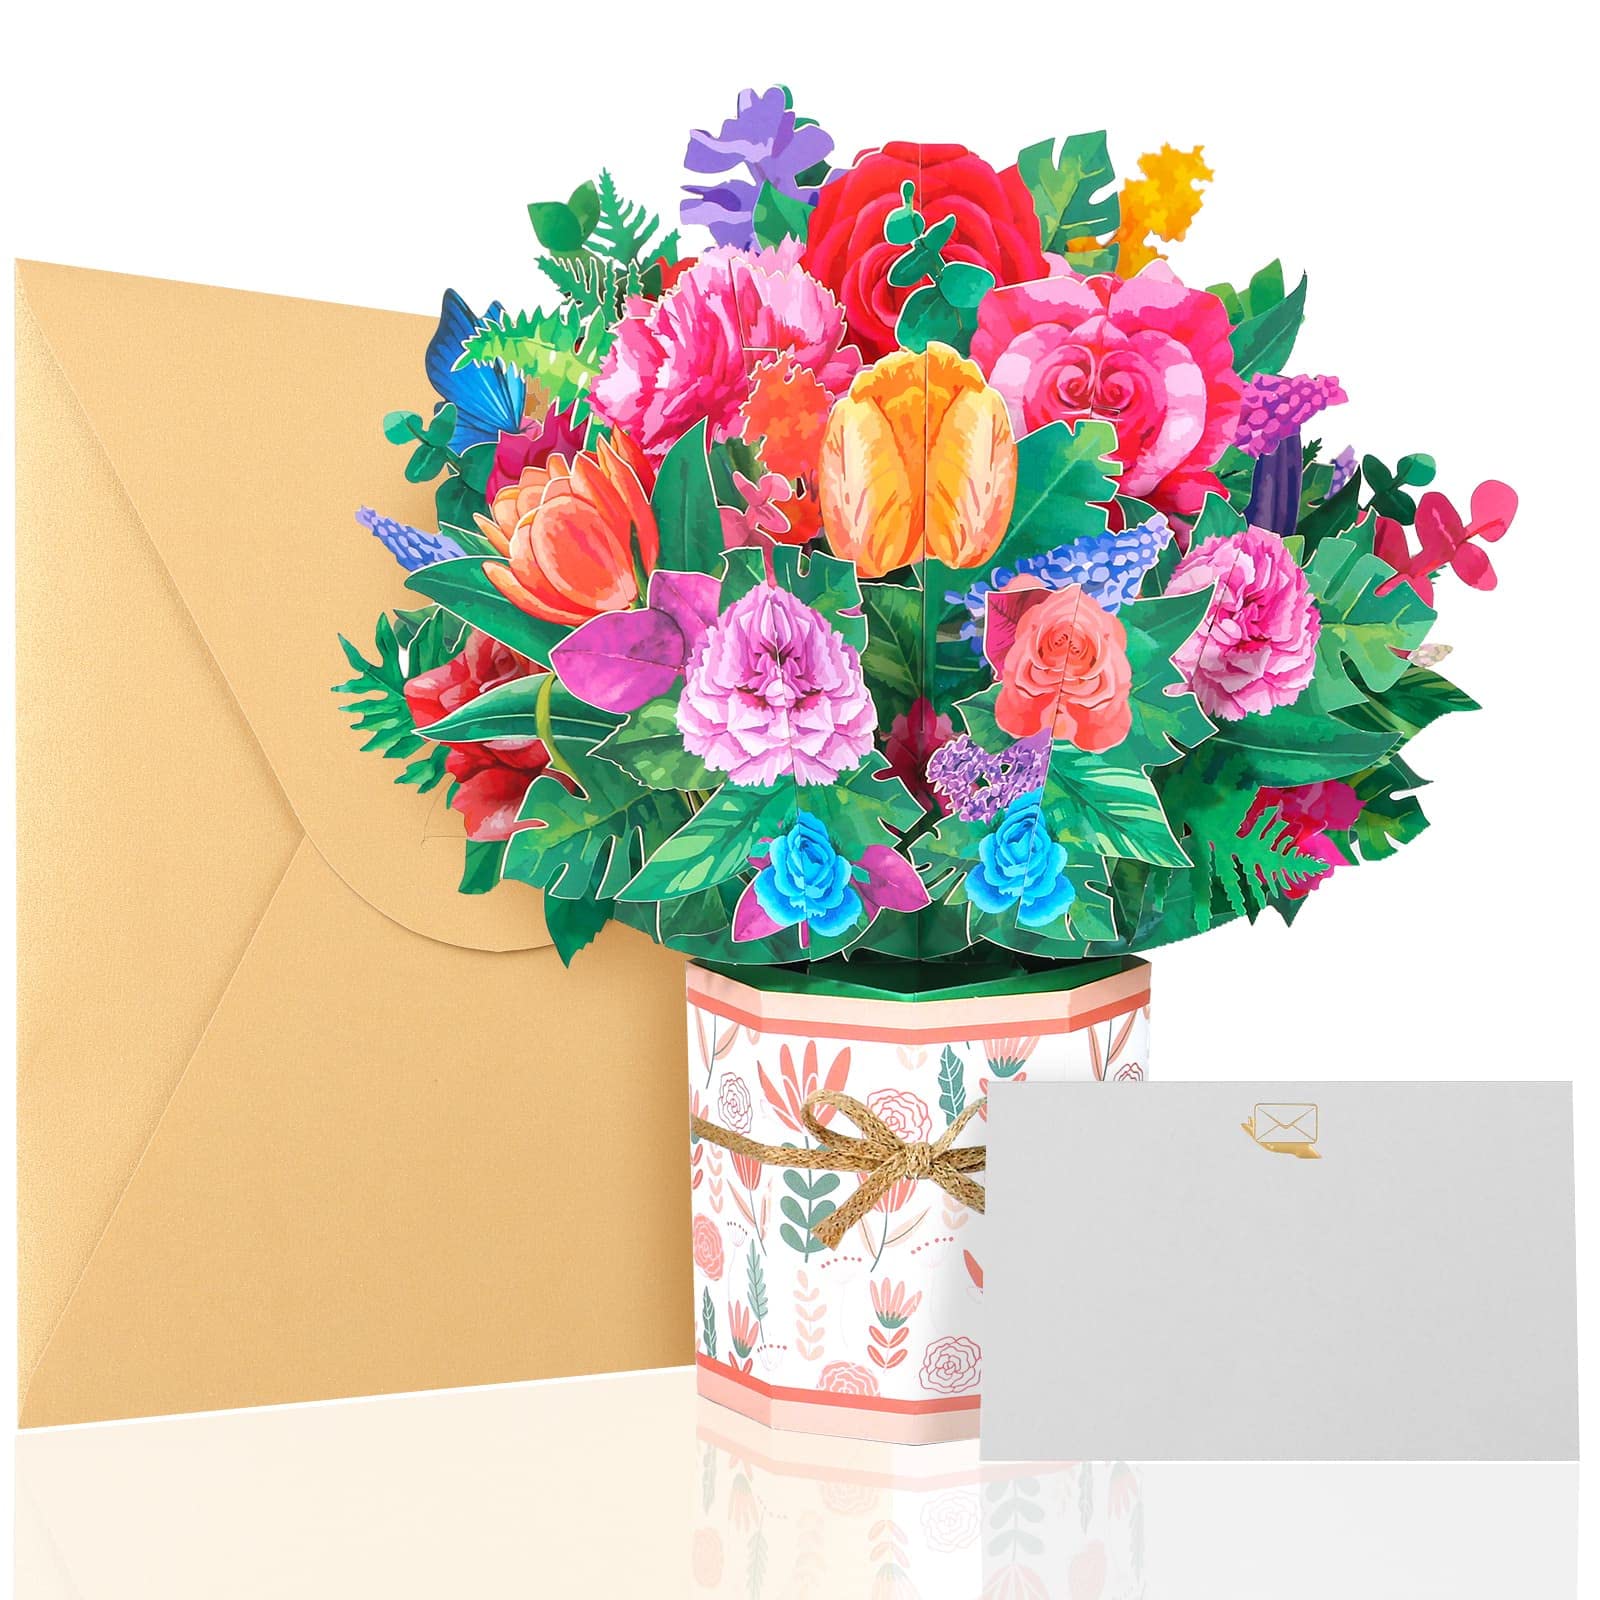 Thank you note or a bouquet of flowers